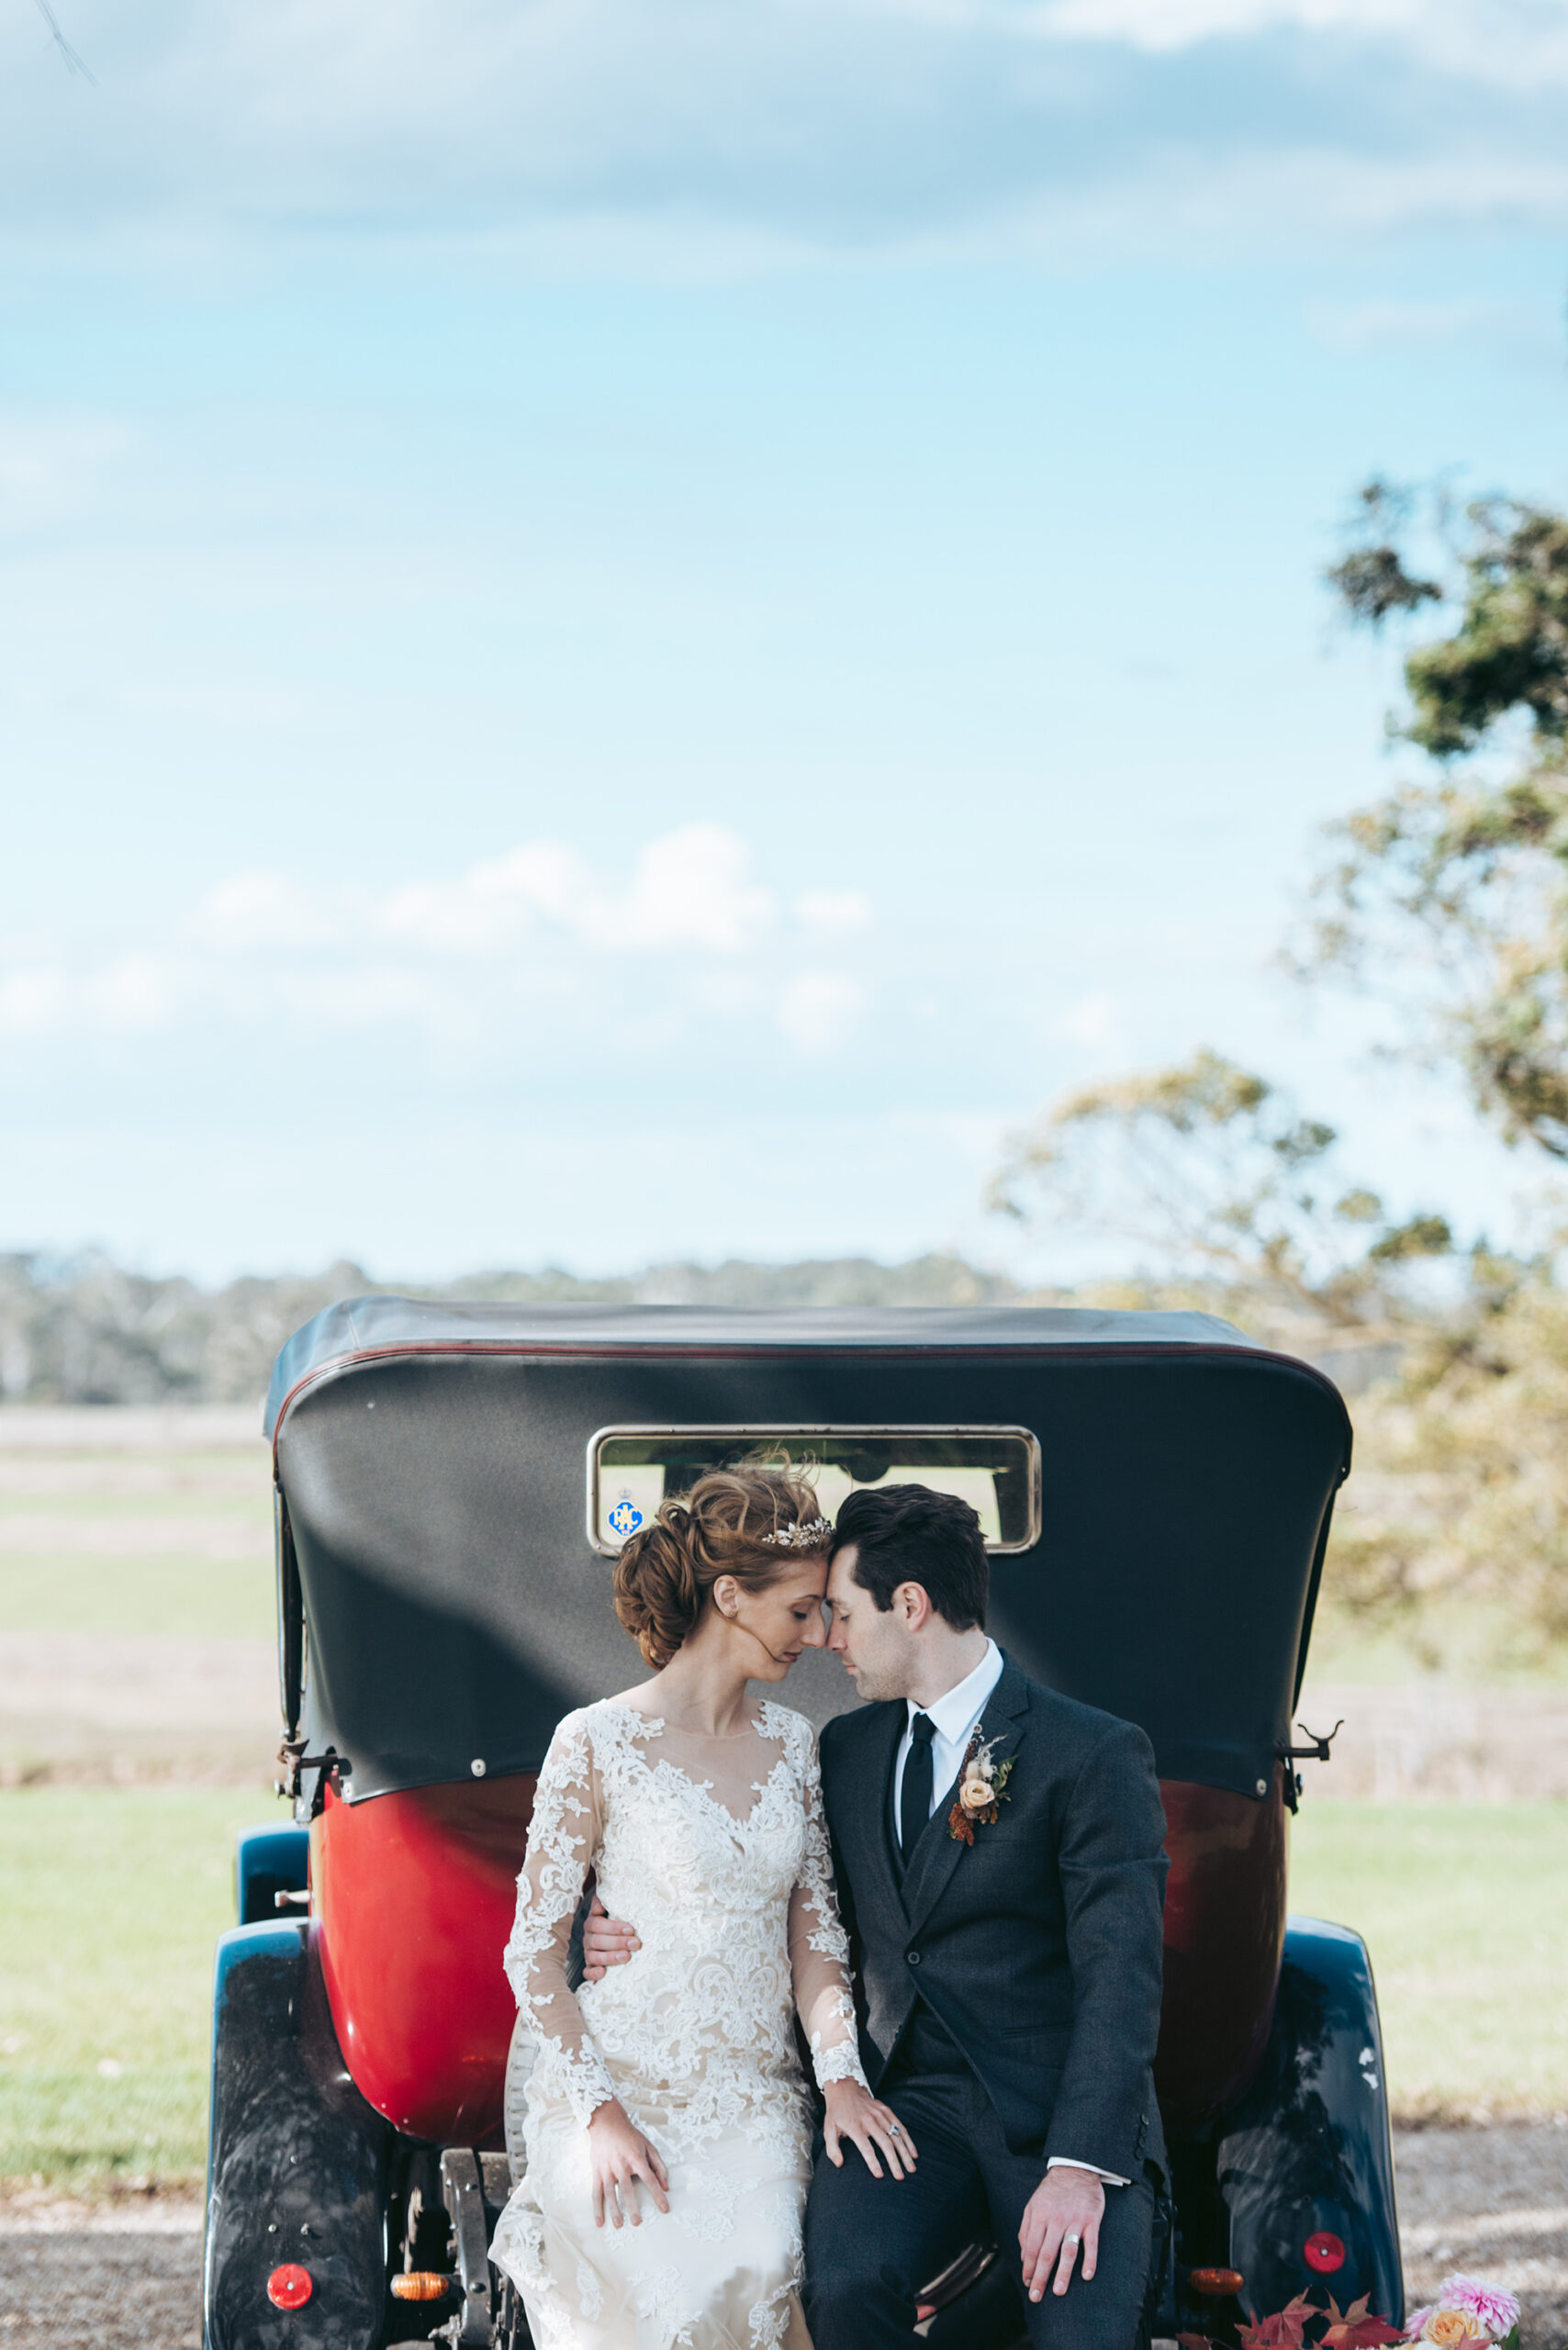 Boho Luxe Weddings Inspiration Photography House Danielle Oliver 011 scaled